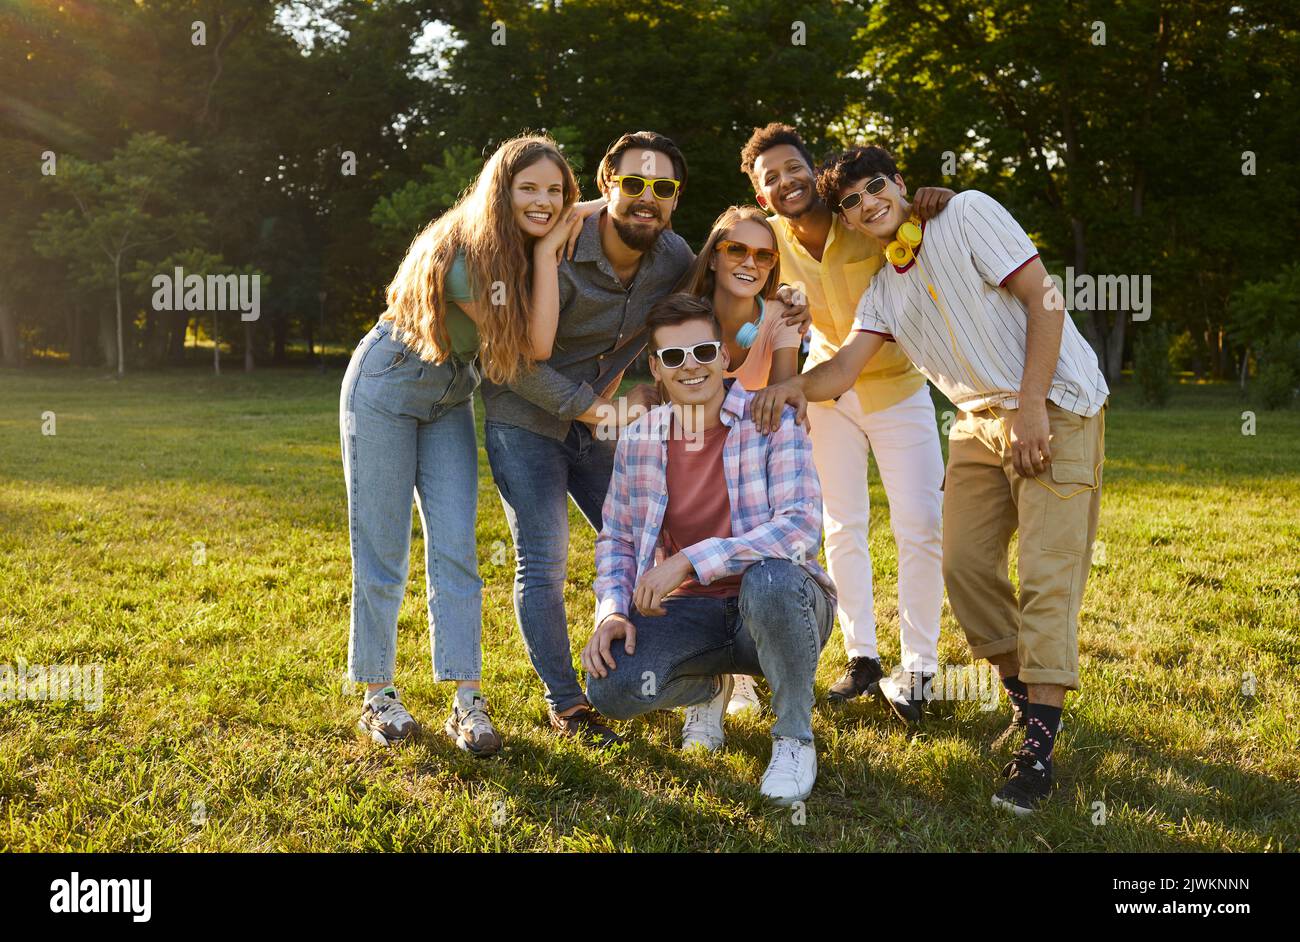 Young friendly multiethnic people in casual clothes posing with smile after summer walk together Stock Photo